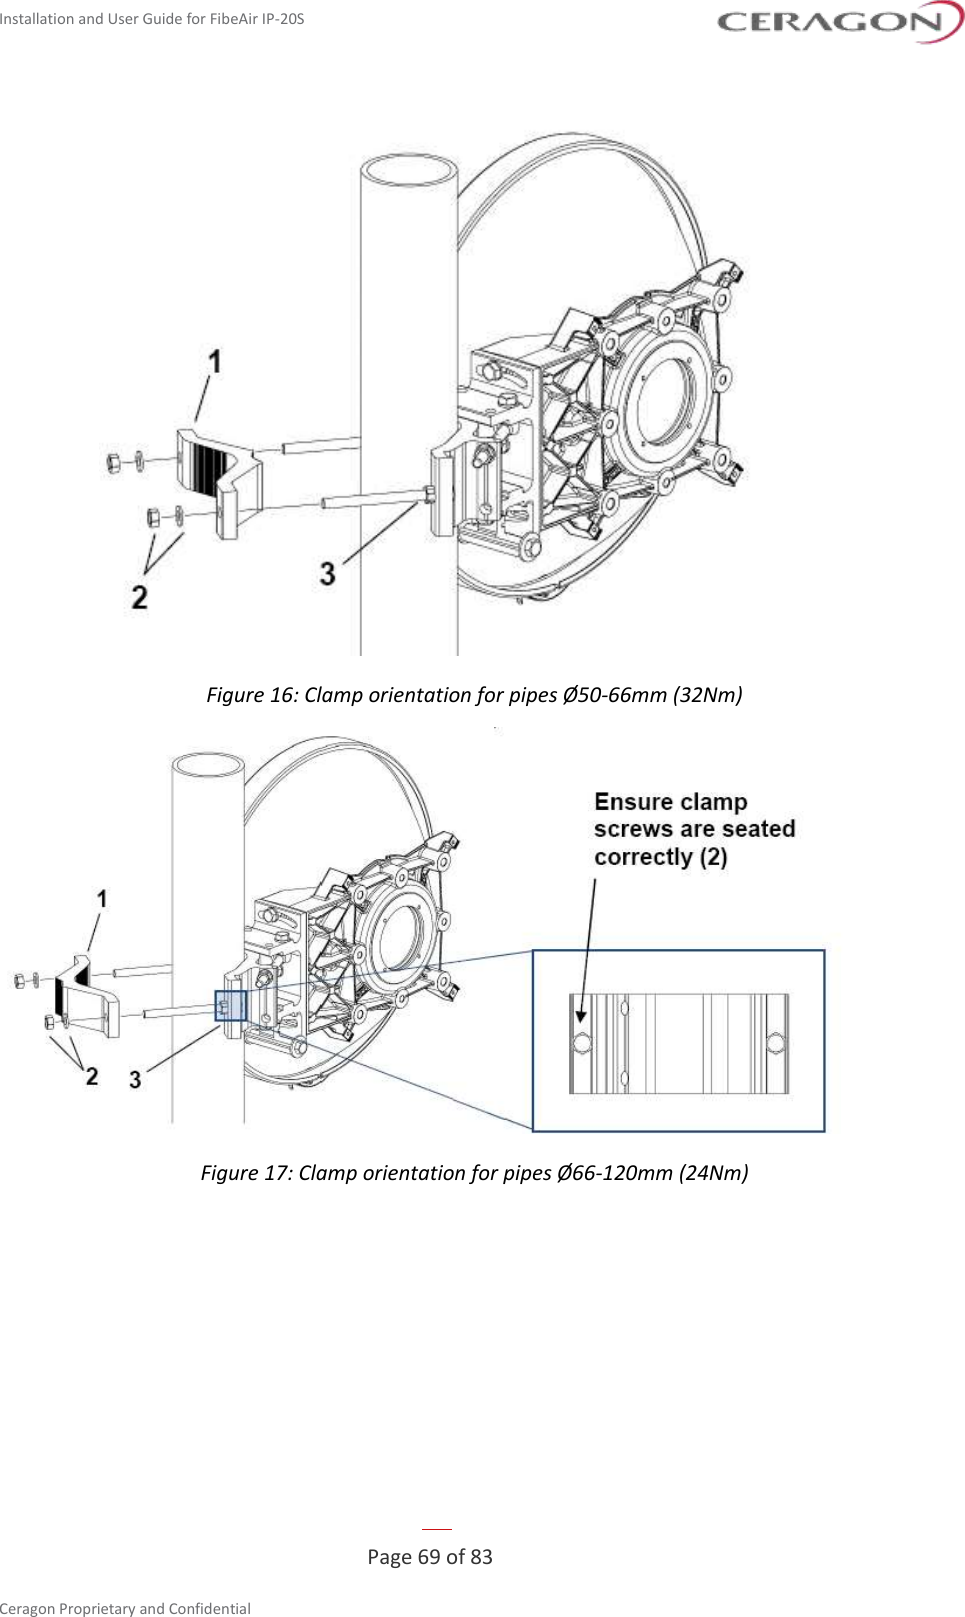 Installation and User Guide for FibeAir IP-20S   Page 69 of 83  Ceragon Proprietary and Confidential      Figure 16: Clamp orientation for pipes Ø50-66mm (32Nm)  Figure 17: Clamp orientation for pipes Ø66-120mm (24Nm) 